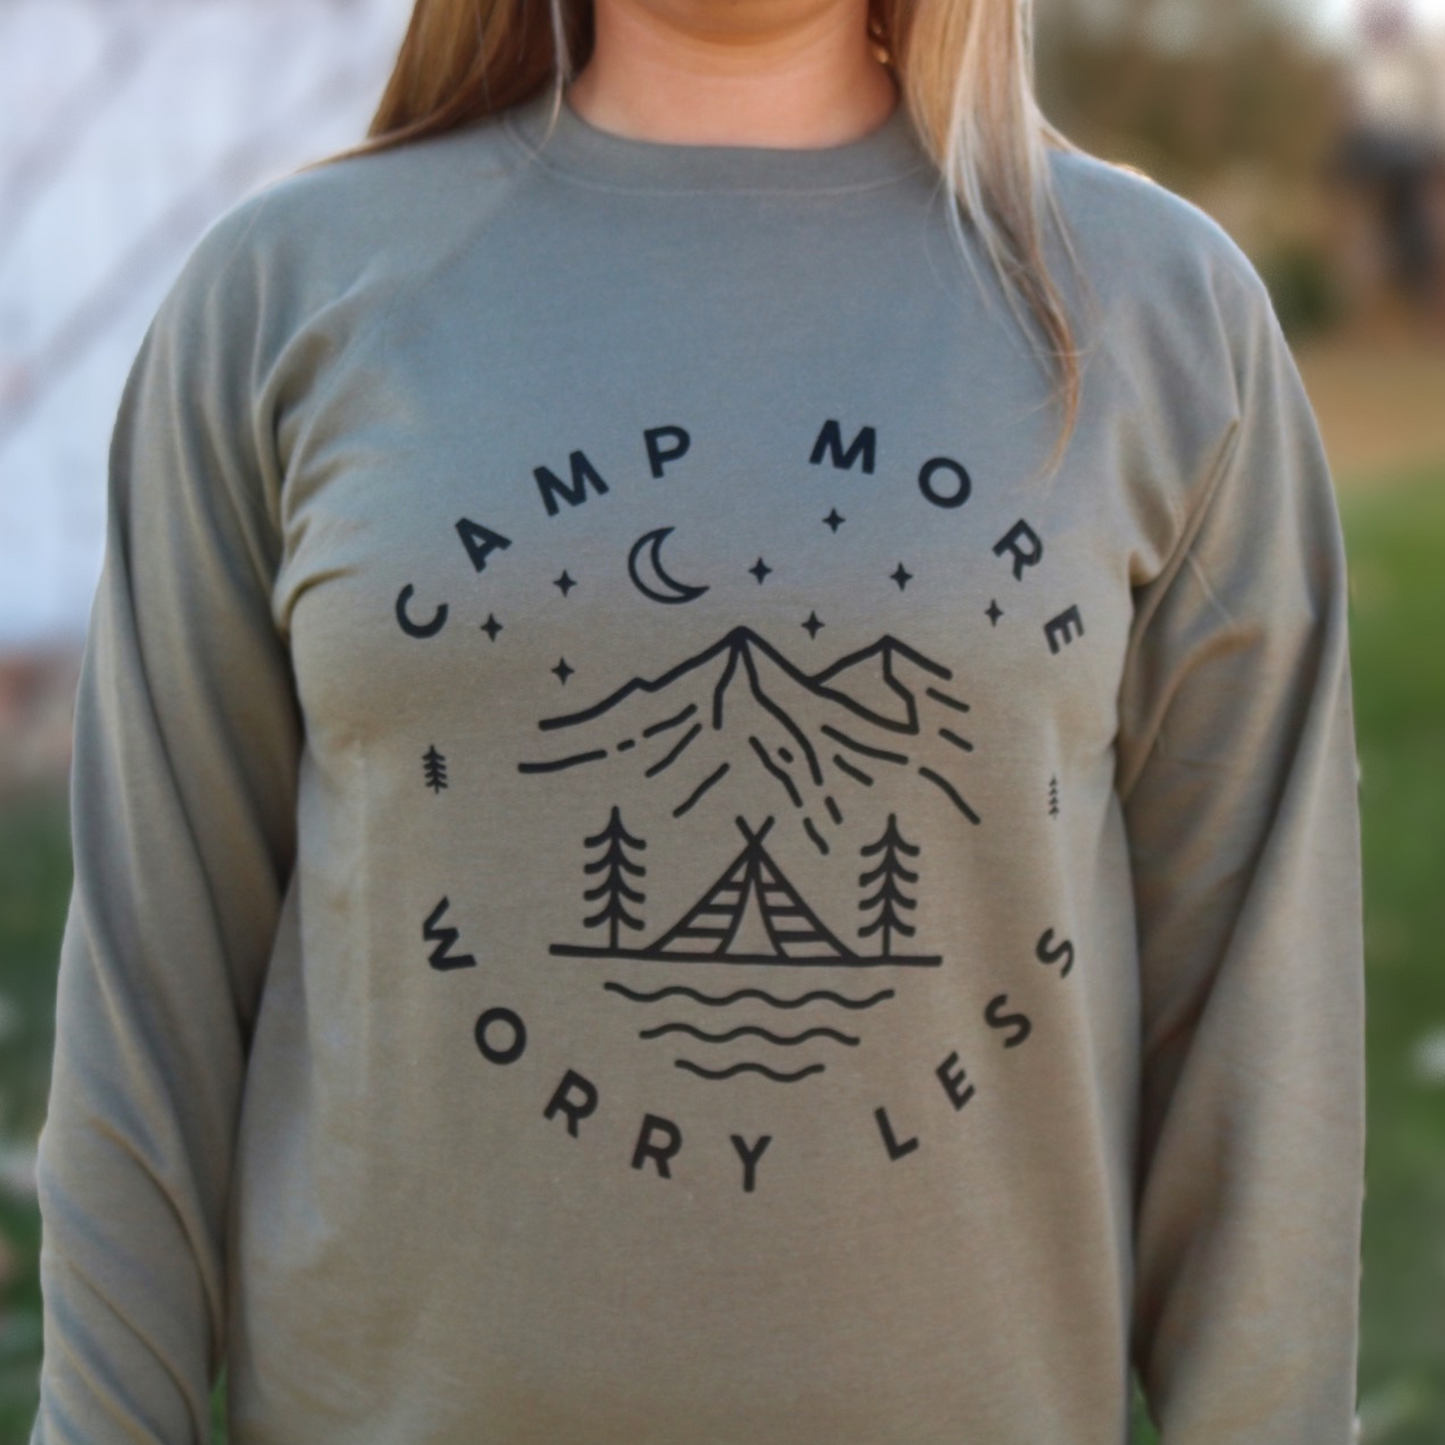 Camp More Worry Less - Pull Over Sweatshirt. Design has "camp more" on top & "worry less" on the bottom curved in a circle with small pine trees separating the words. In the middle includes a tent siting on a bay of water with pine trees standing on both sides of the tent, with mountains in the background and stars aligning with a moon above the mountains. The design is in black on an olive green blank. This is the front view of the sweatshirt on a model (up close view).